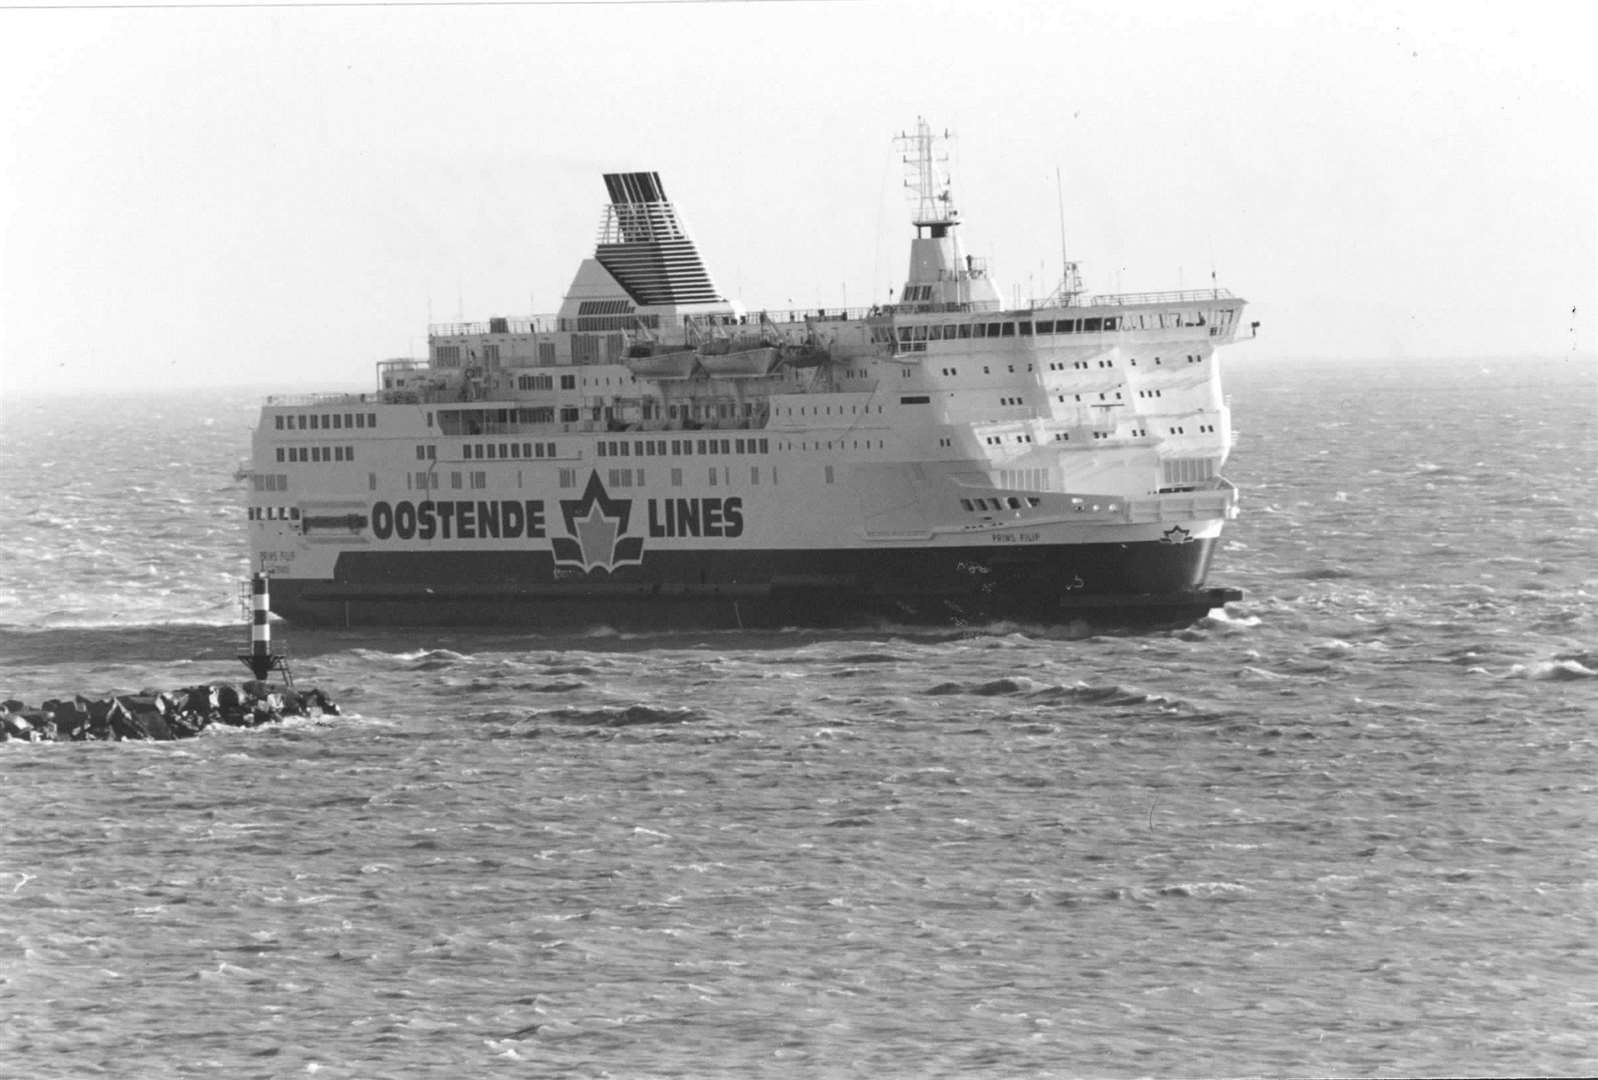 The Prins Filip - sailing into Ramsgate - was operated by Oostende Ferries with sales handled by Sally Line in the UK